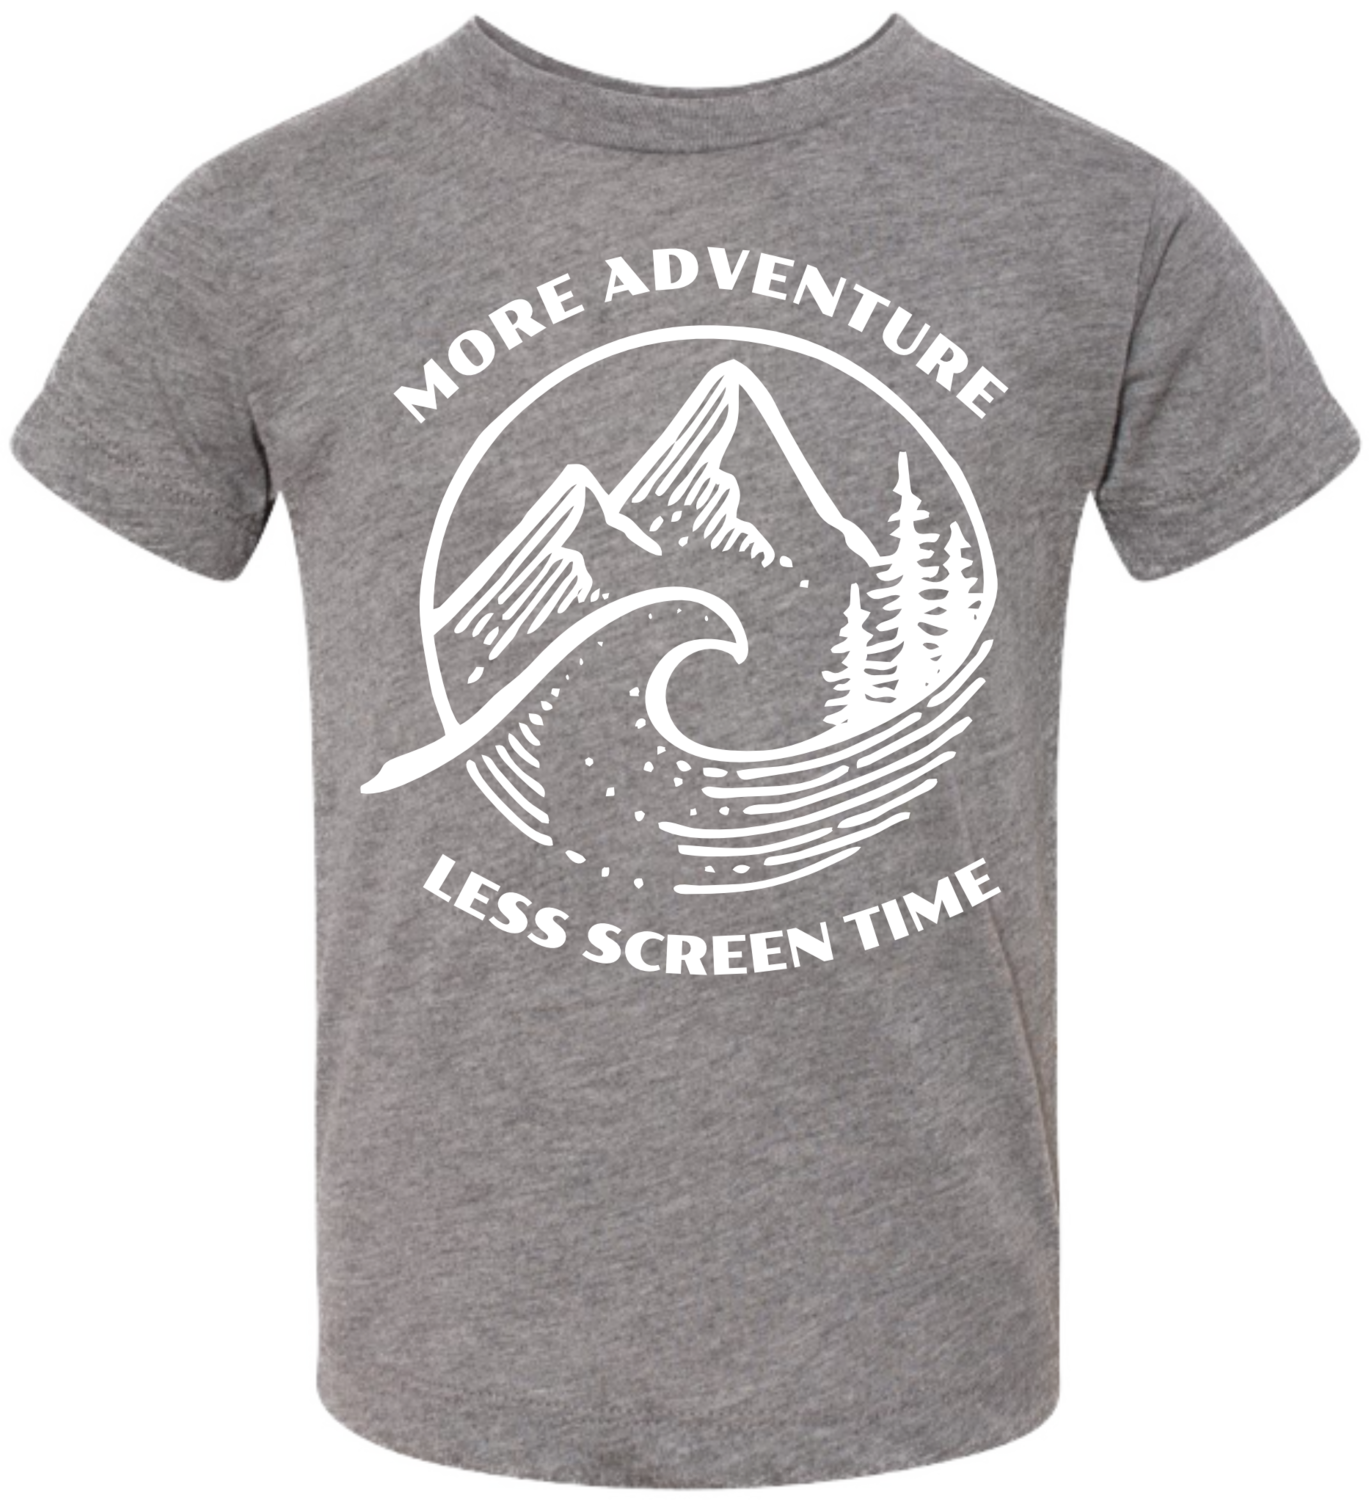 MORE adventure LESS screentime Tee $35, Toddler